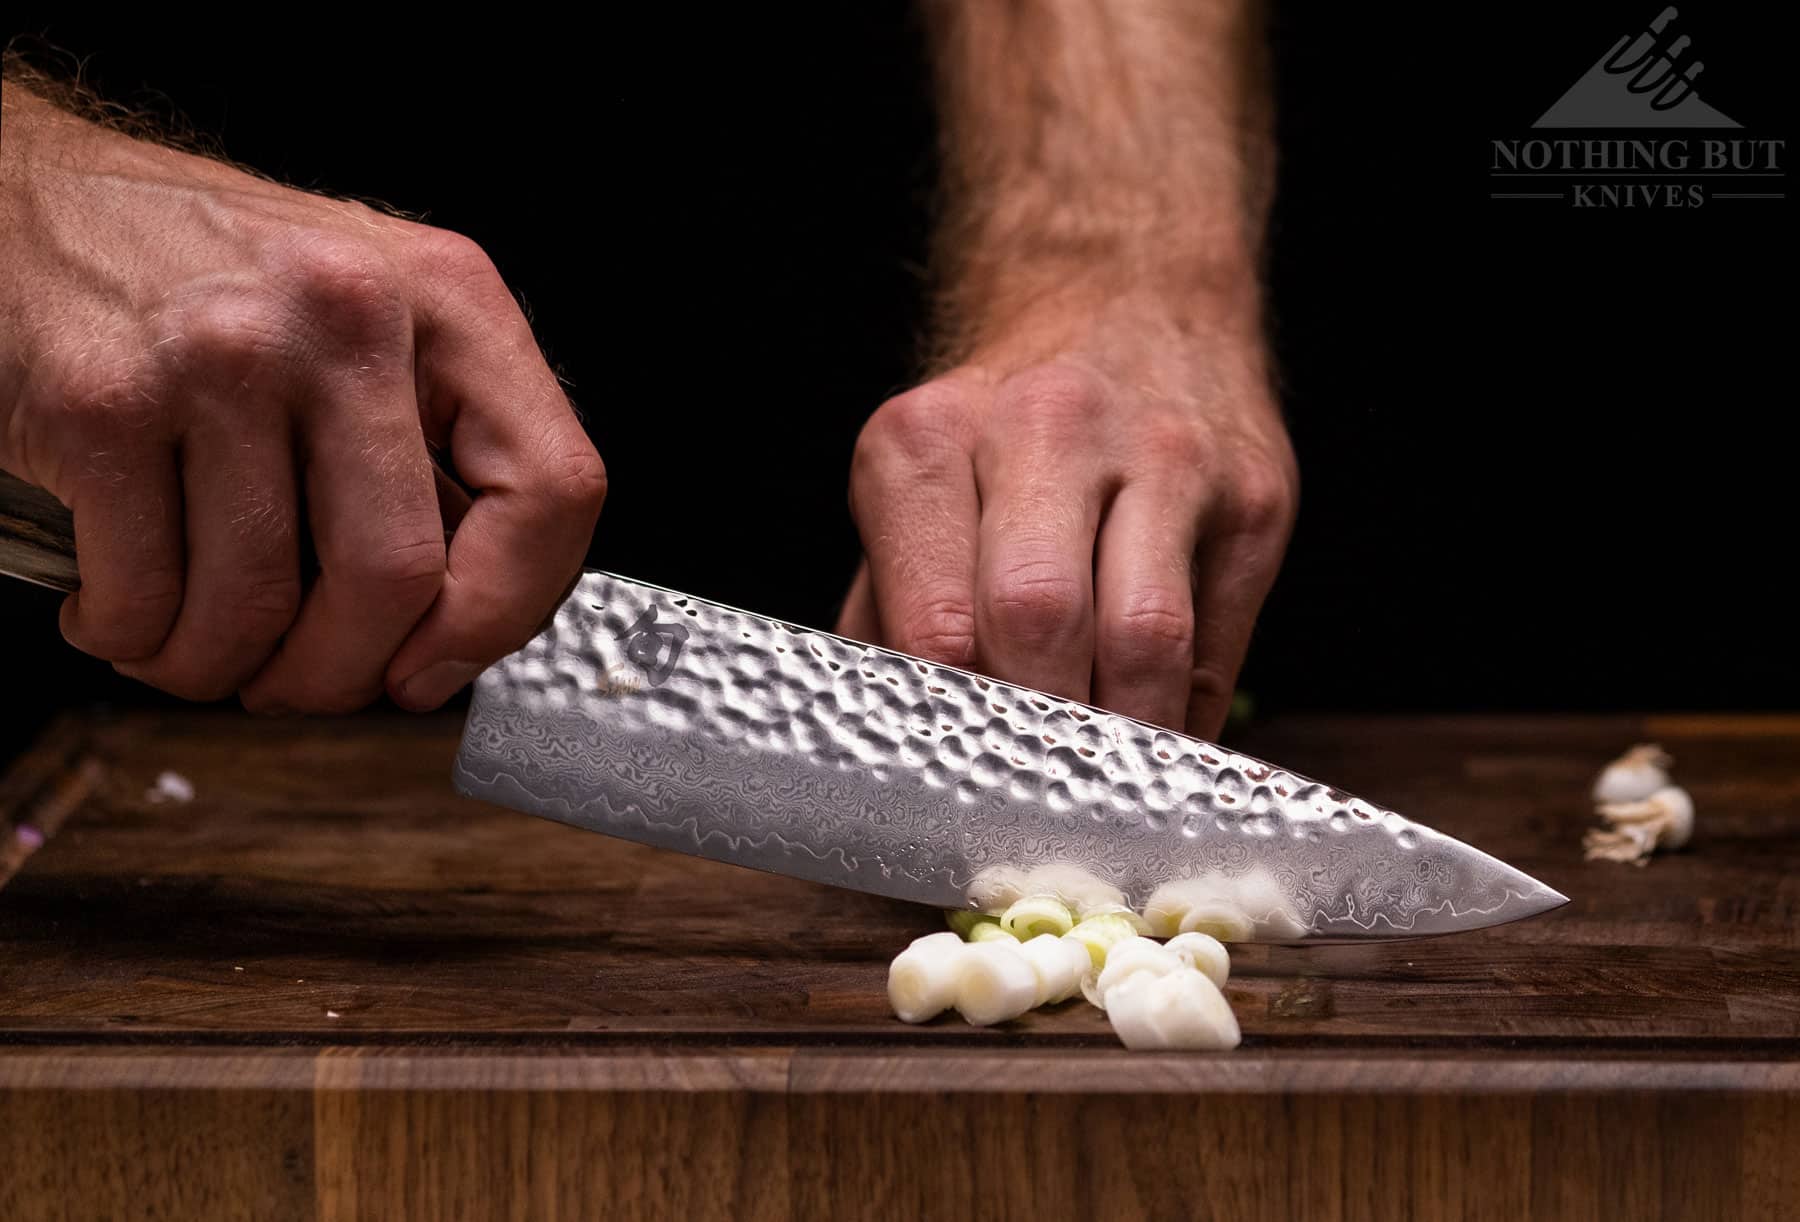 https://www.nothingbutknives.com/wp-content/uploads/2022/07/Cutting-Vegetables-With-The-Shun-Premier-Chef-Knife.jpg